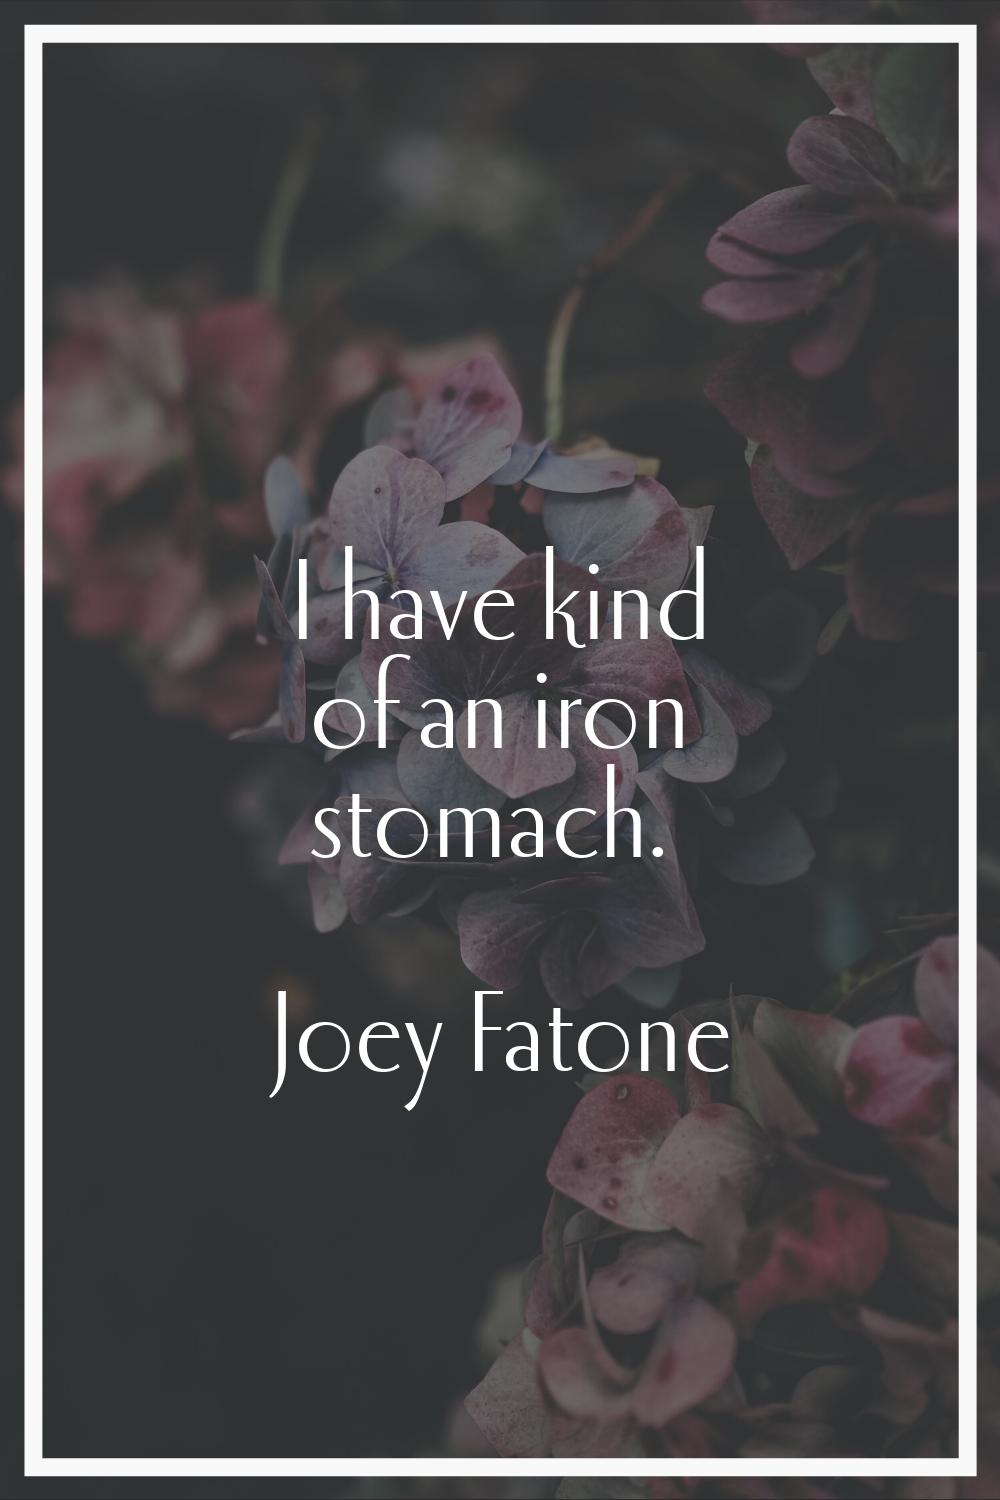 I have kind of an iron stomach.